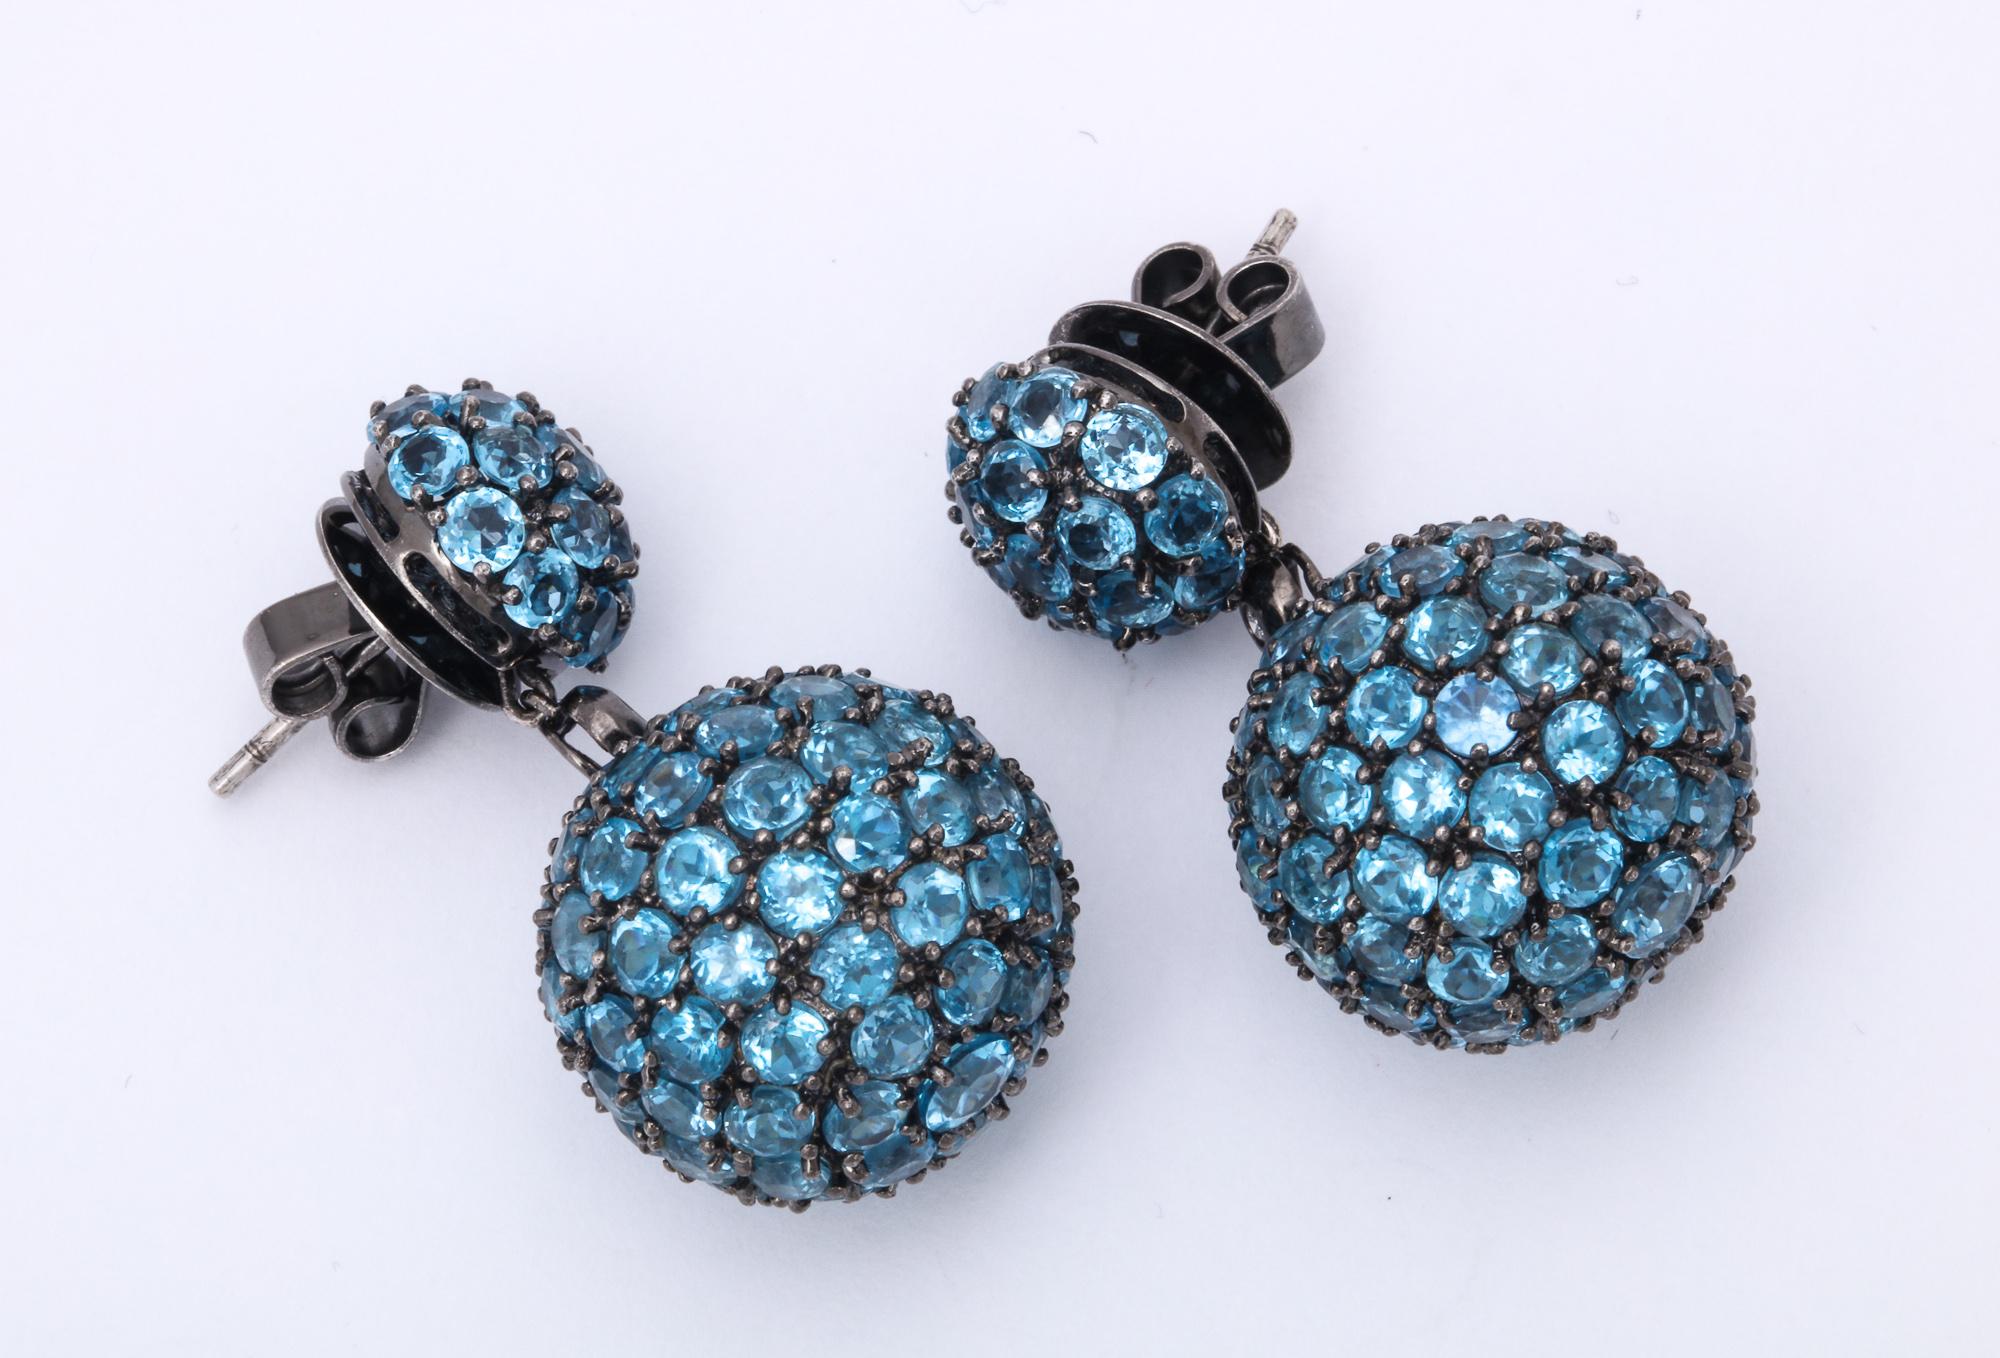 One Pair Of Ladies Double Sphere Drop Earrings Created In 18kt Oxidized White Gold. Earrings Are Paved With Numerous Faceted Blue Topaz Stones Weighing Approximately 15 Carats Total Weight. Earrings Move When Worn To Capture Full Light Of The